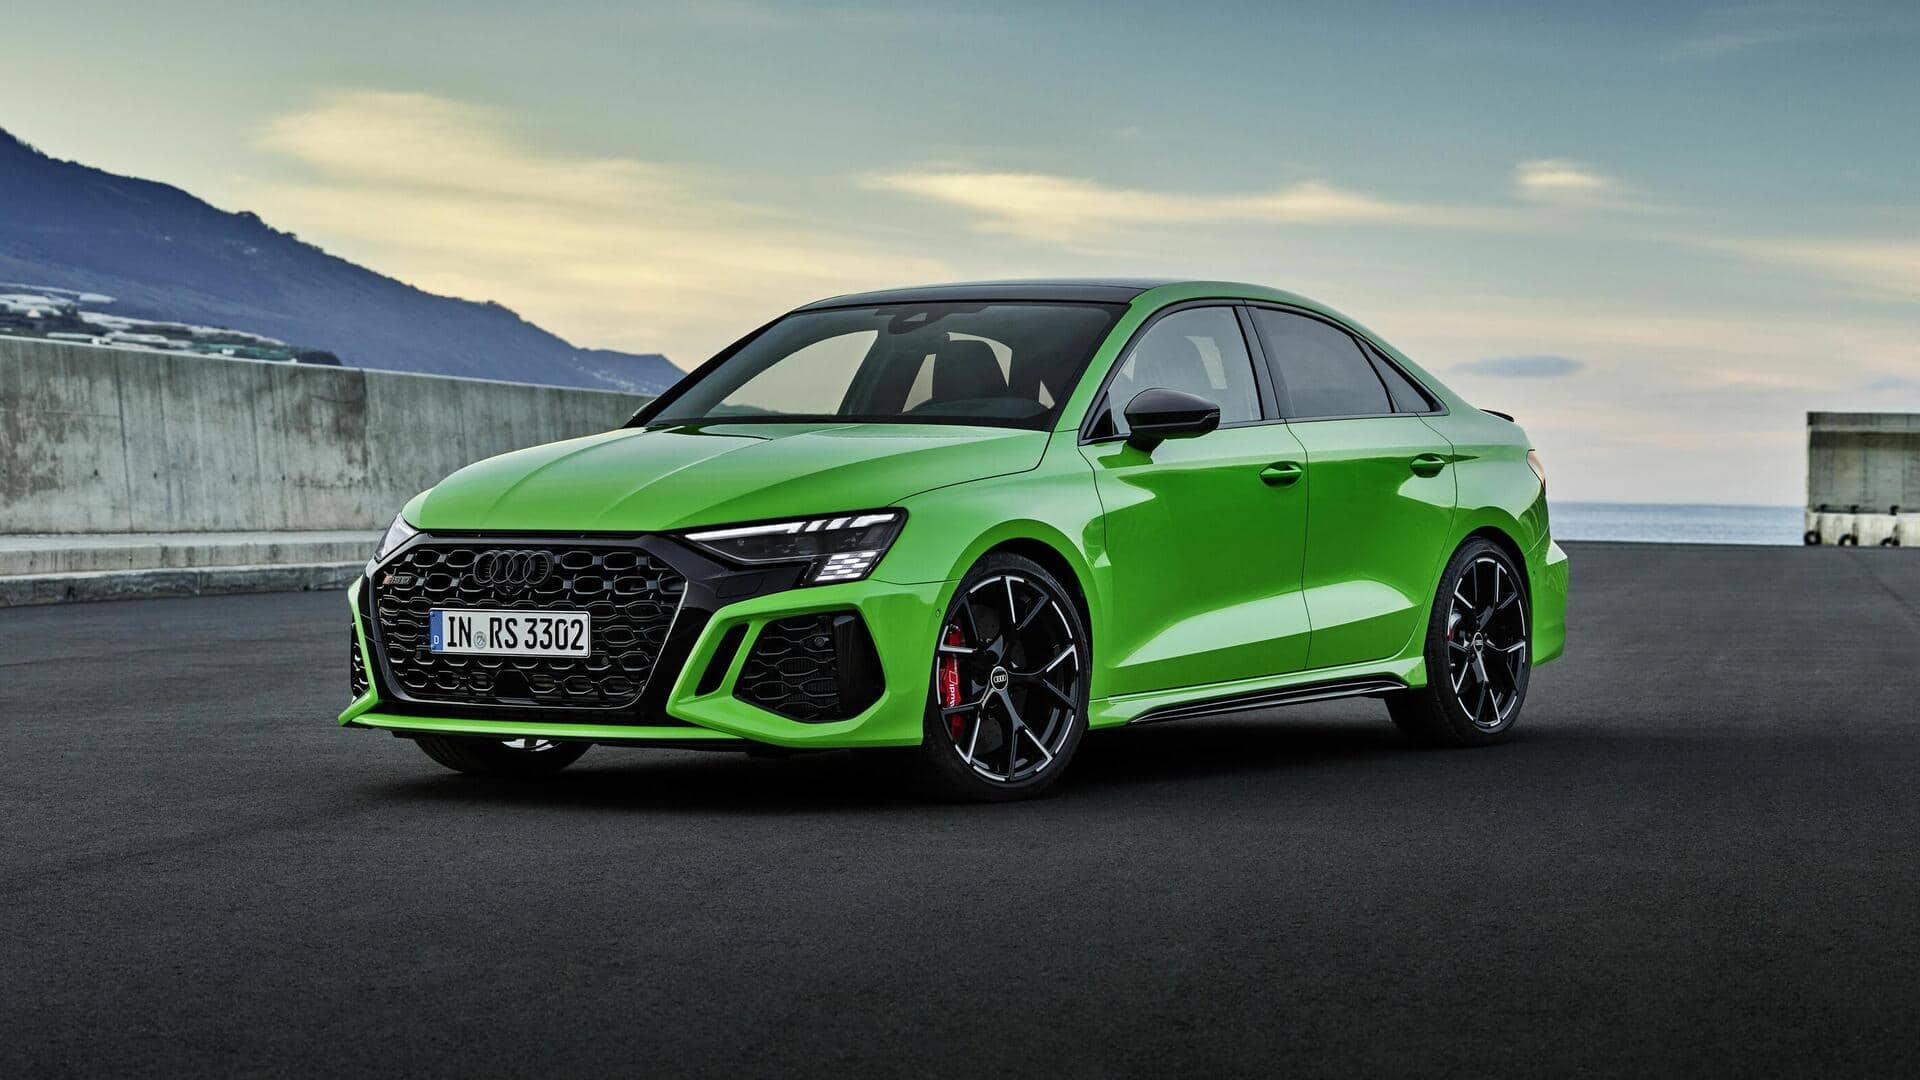 New-generation Audi S3 and RS3 in the works: Expected features